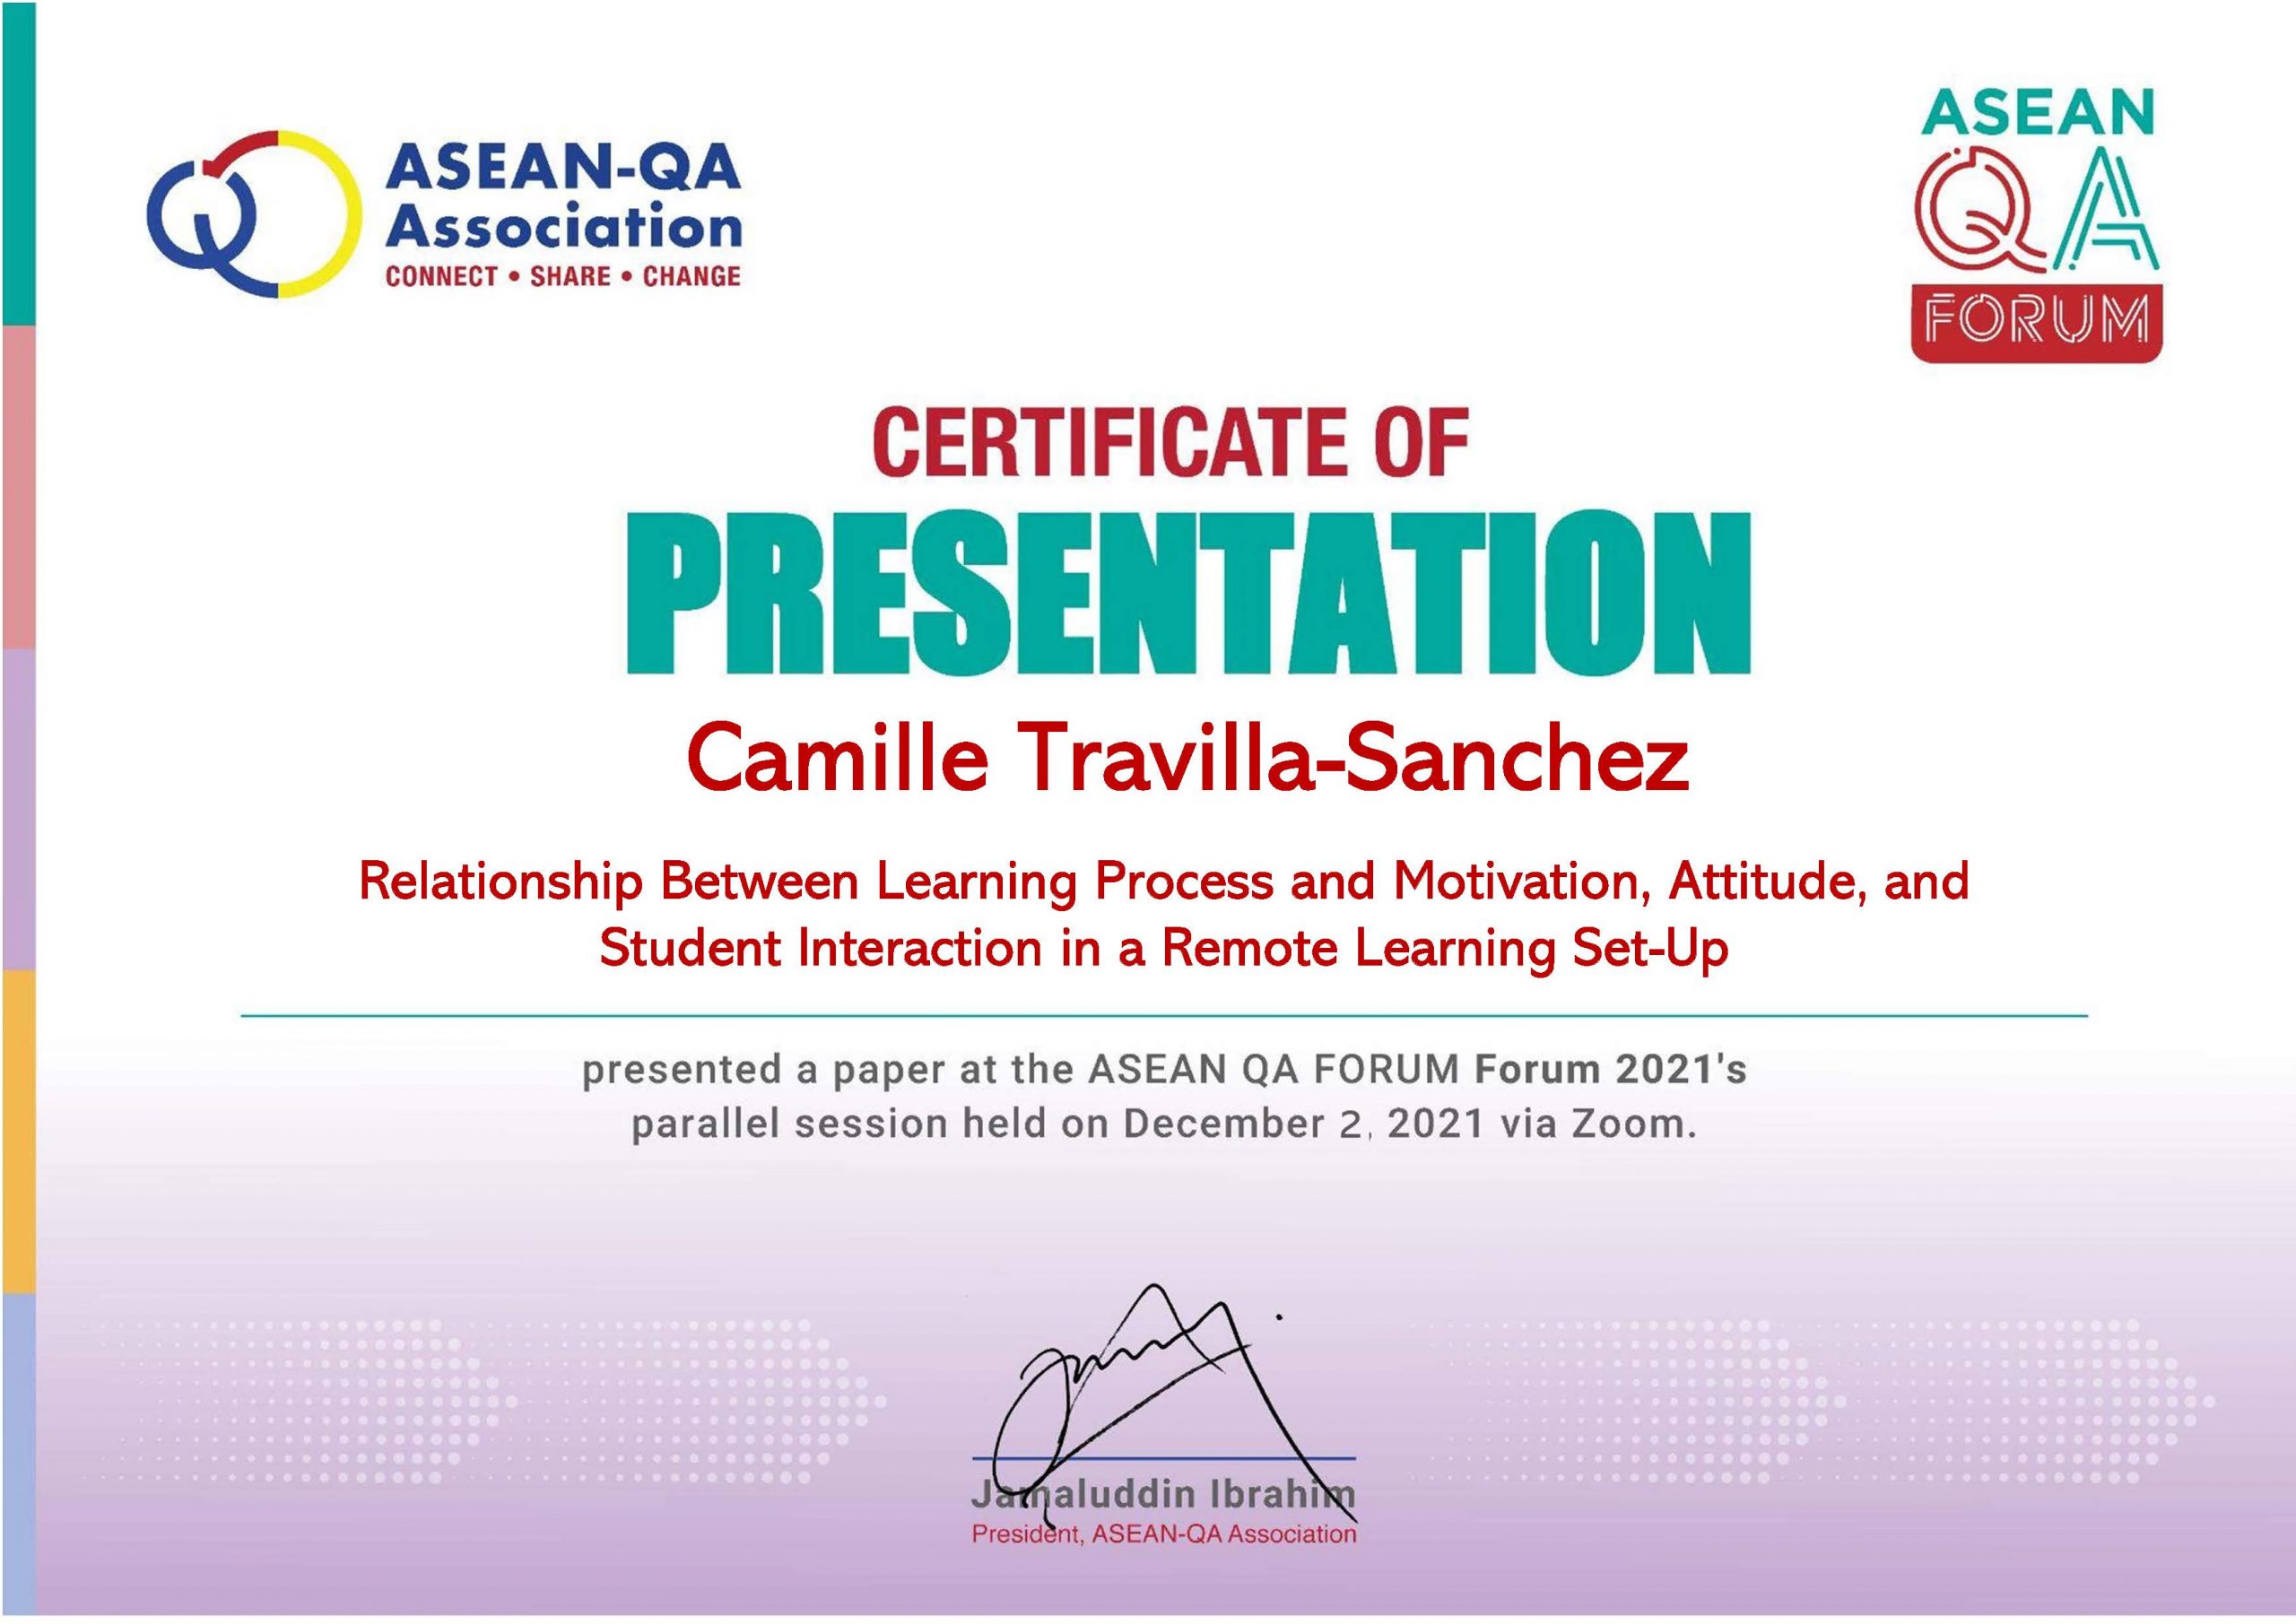 MBA student Ms. Travilla-Sanchez presents her research paper at the ASEAN Quality Assurance Forum